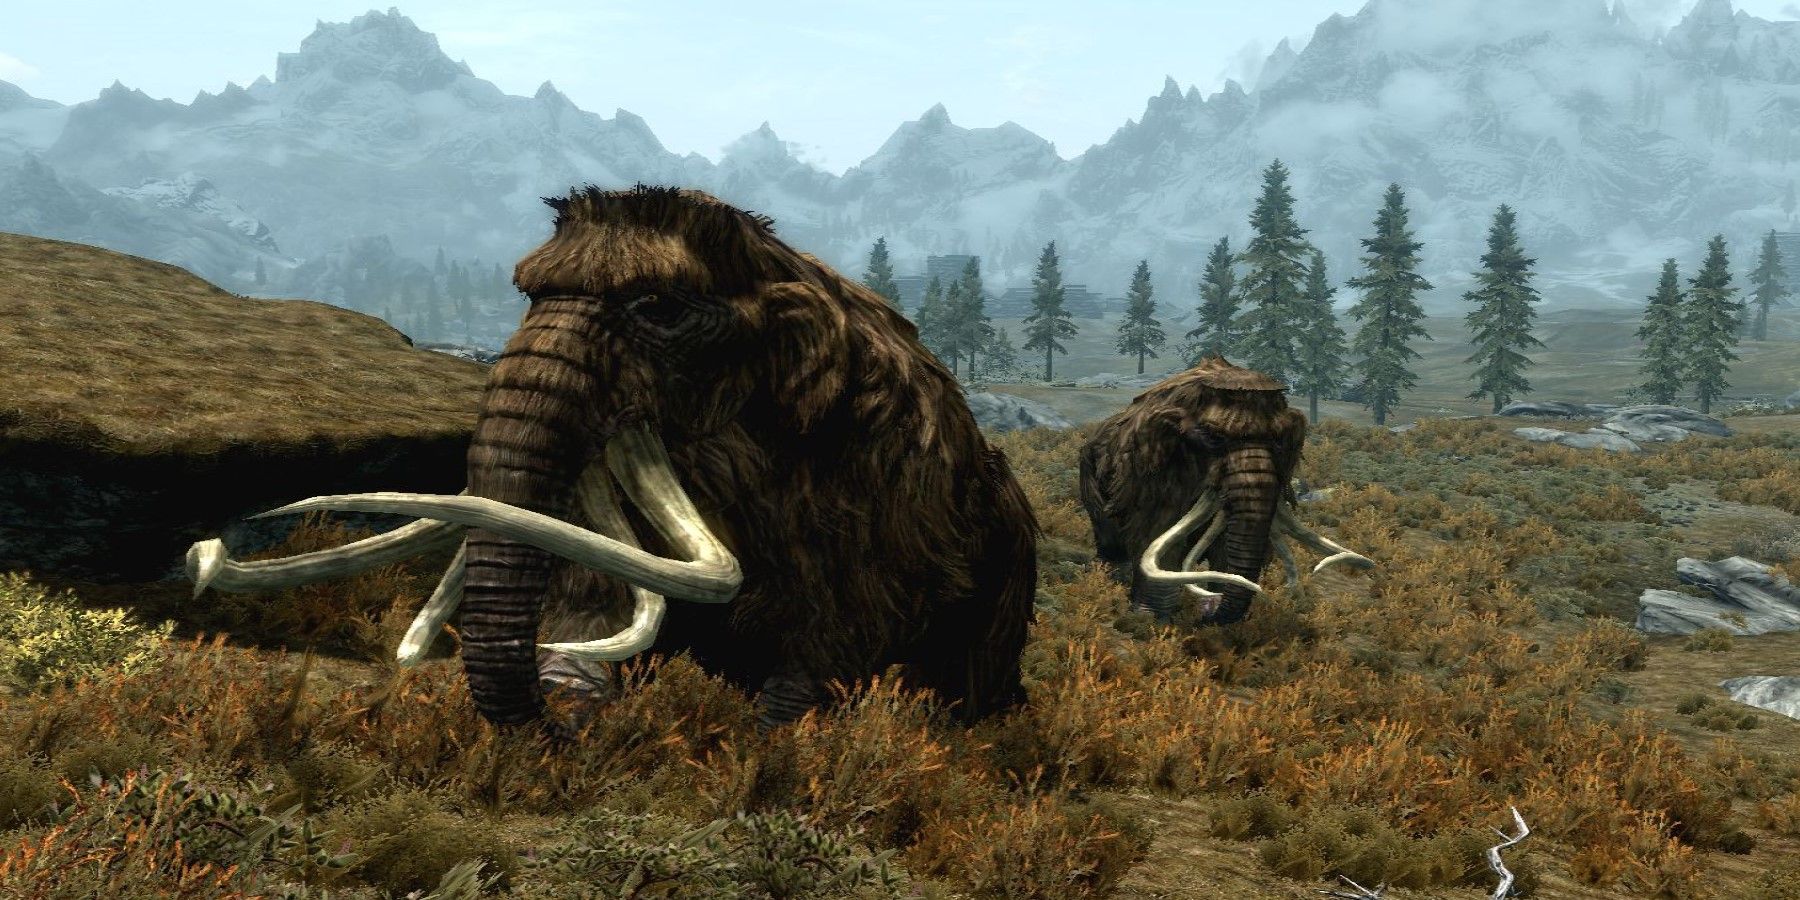 Lucky Skyrim Player is Rescued From an Angry Mammoth By Something Even Scarier